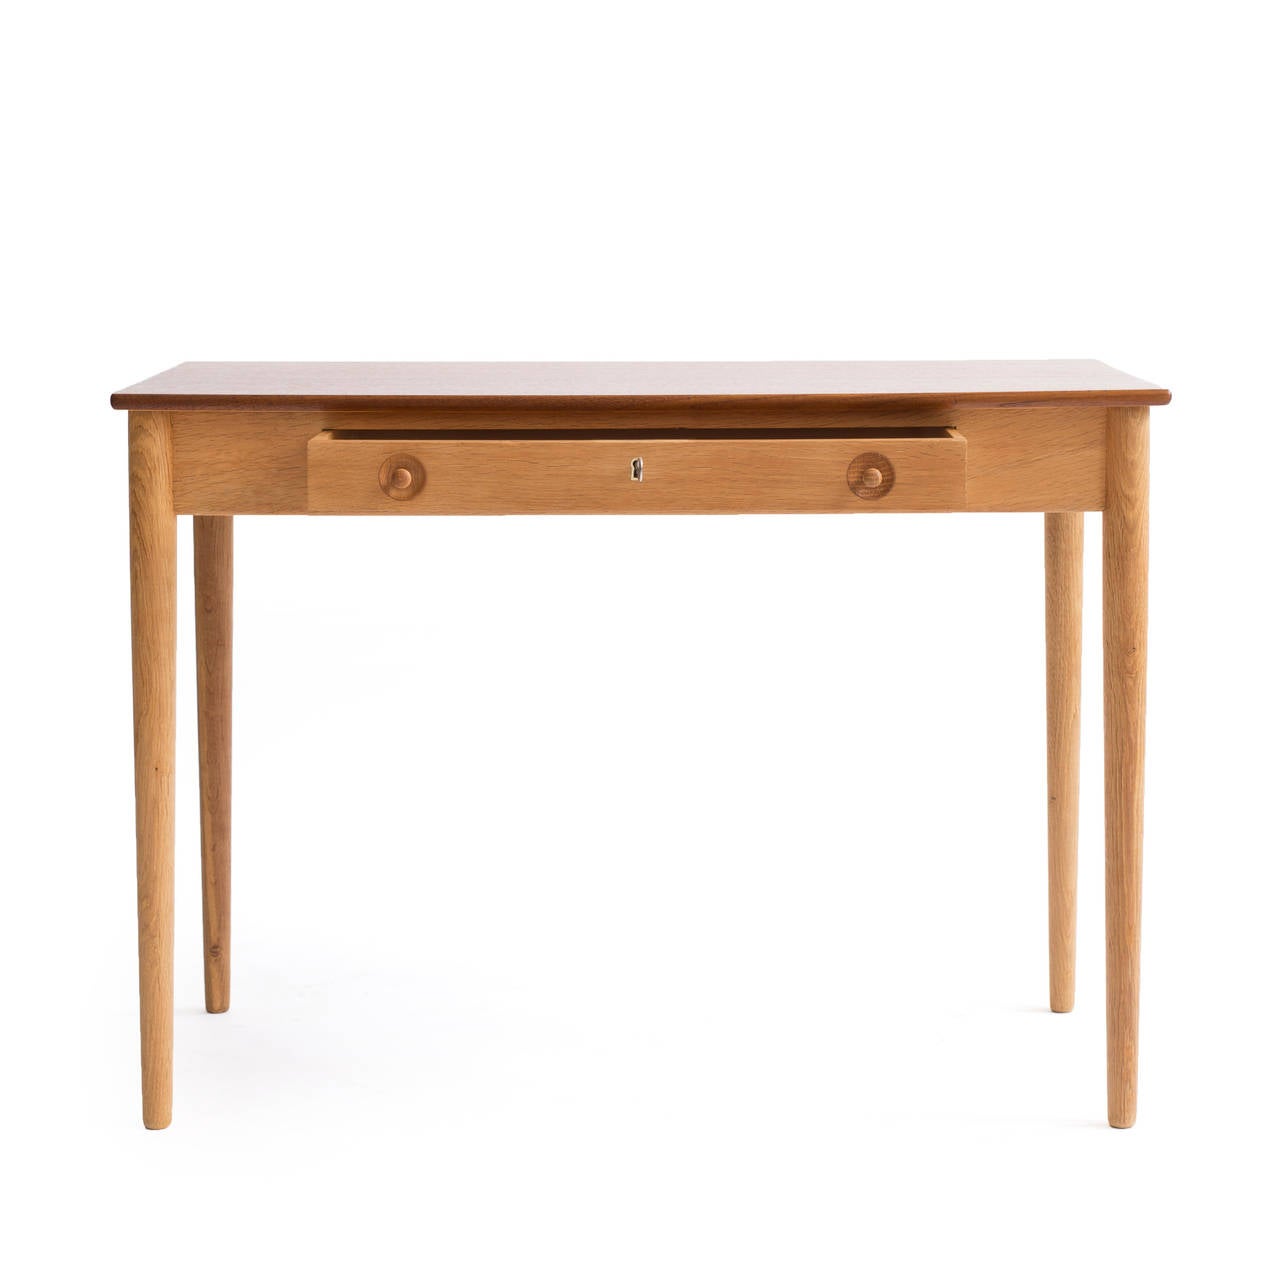 Hans J. Wegner writing desk with one front drawer, legs and frame of oak, top of teak.

A small and elegant desk designed by Wegner 1950s and manufactured by Ry Møbler, Denmark, model RY32.